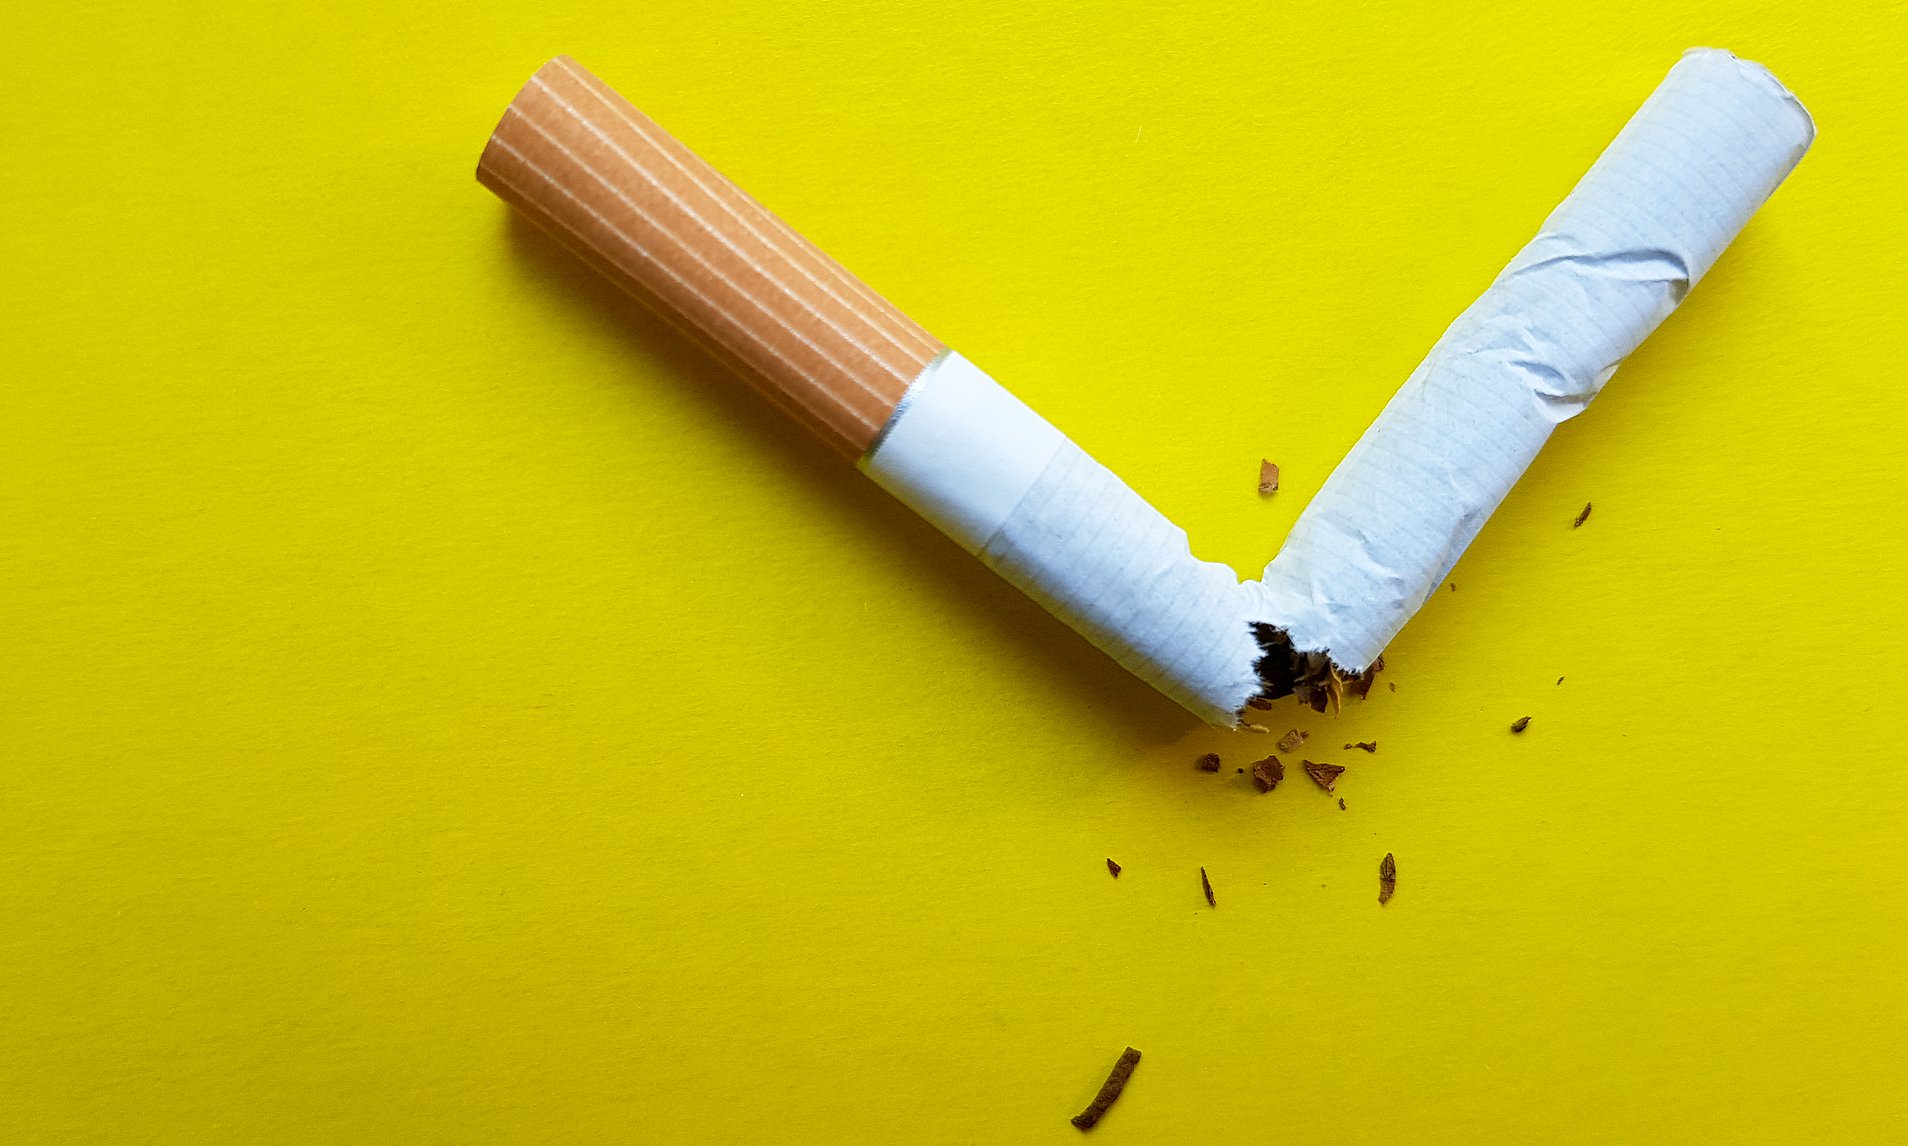 Why doctors may start prescribing nicotine to help beat disease: New research shows the addictive element of cigarettes may be a potential treatment for Parkinson's, dementia and even Covid-19